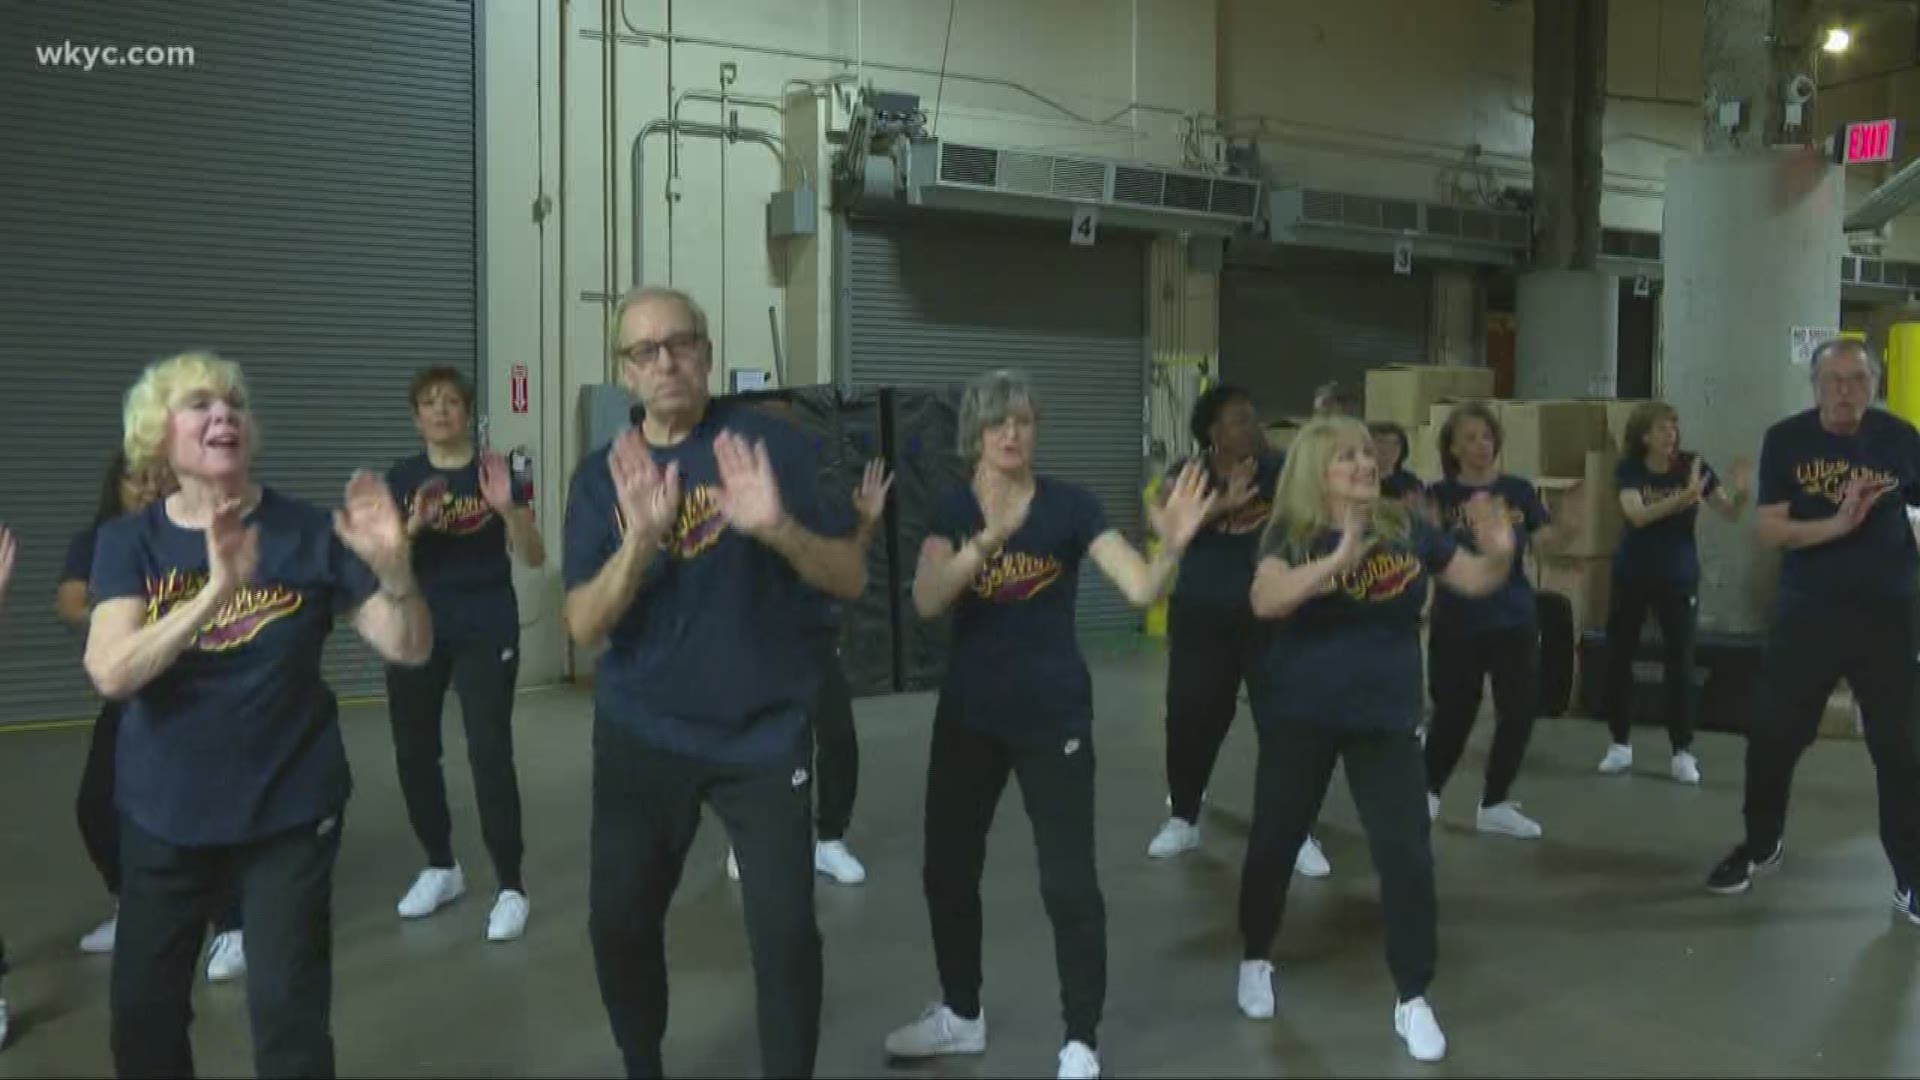 They move. They groove. And, they're all over the age of 50. Let us introduce you to a dance crew that puts us all to shame!